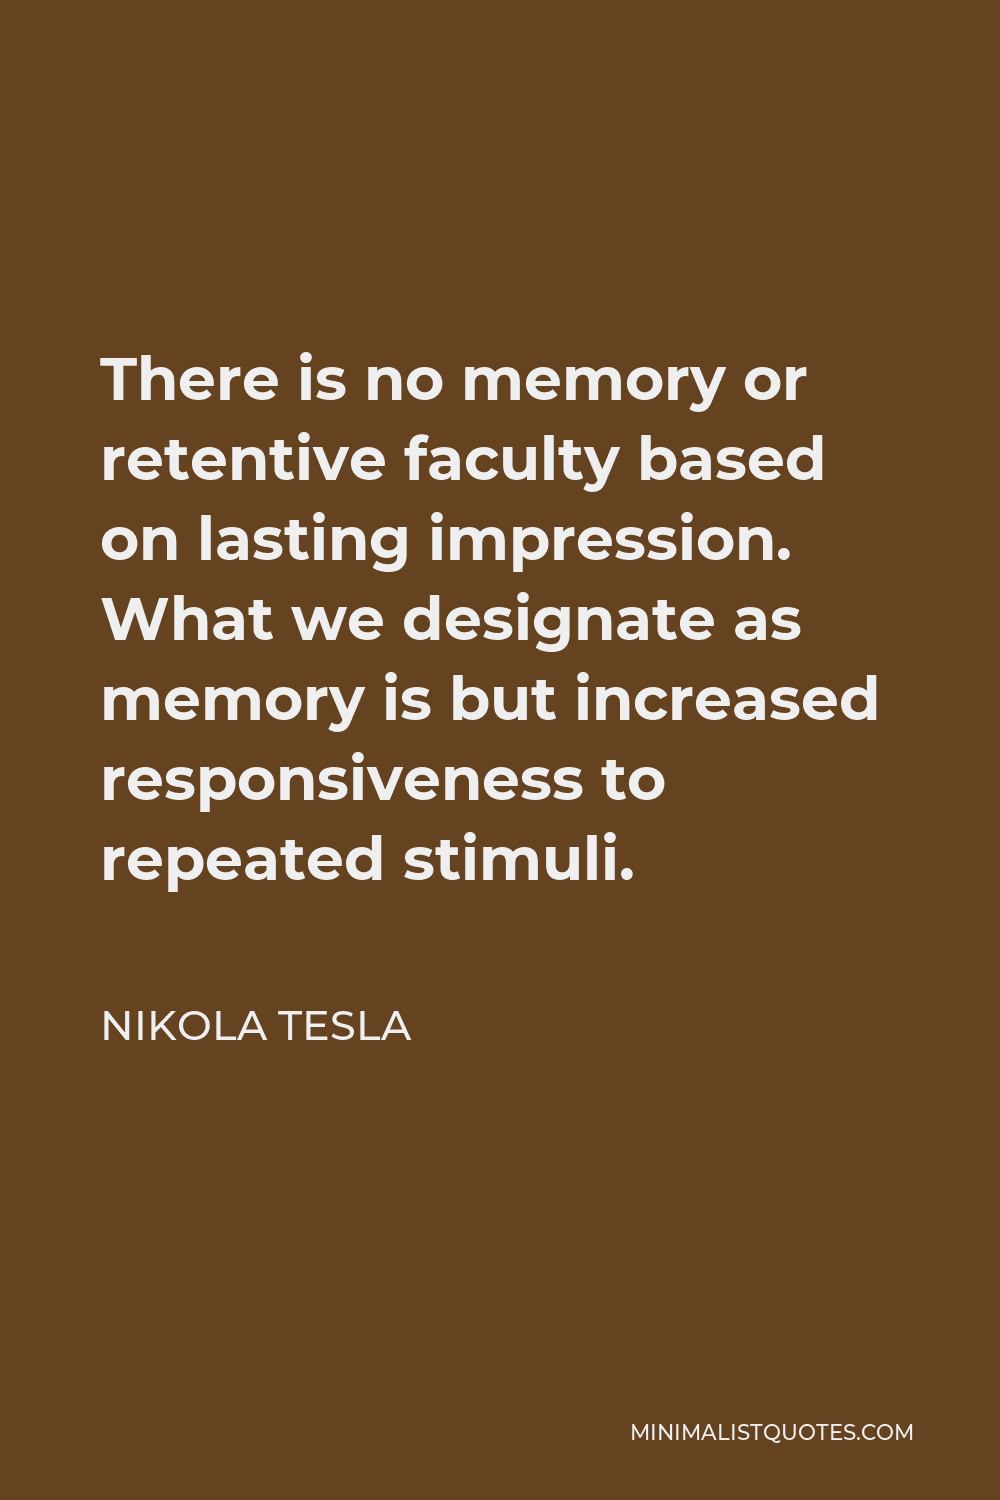 Nikola Tesla Quote - There is no memory or retentive faculty based on lasting impression. What we designate as memory is but increased responsiveness to repeated stimuli.